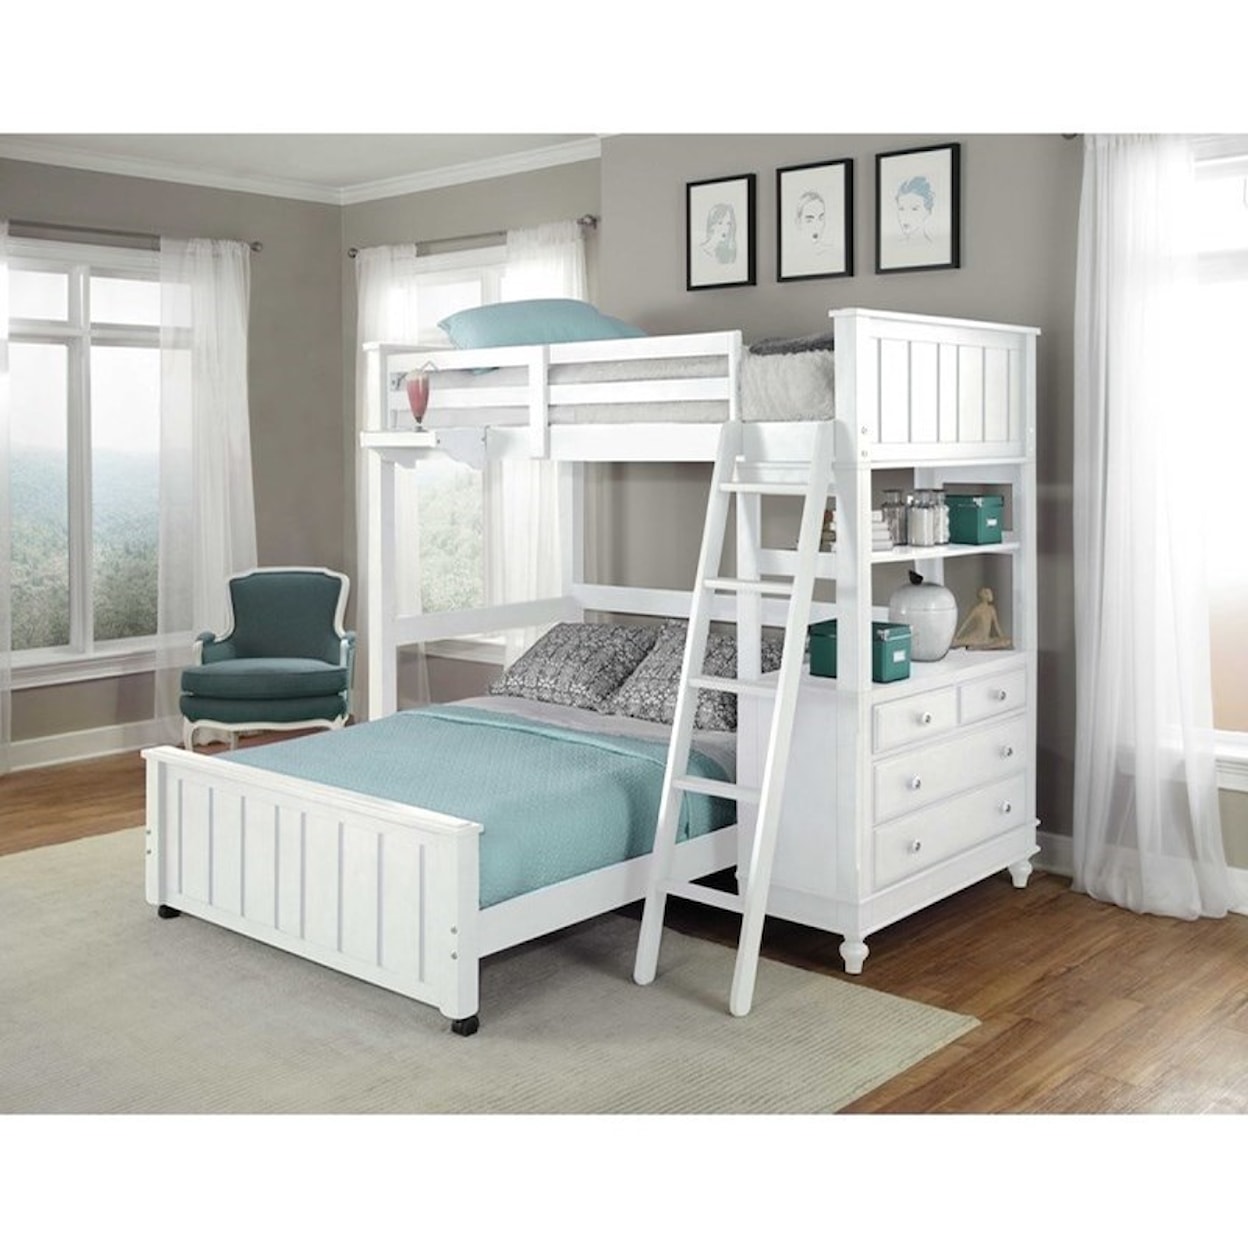 Hillsdale Kids Lake House Lofted Twin Bed with Full Lower Bed